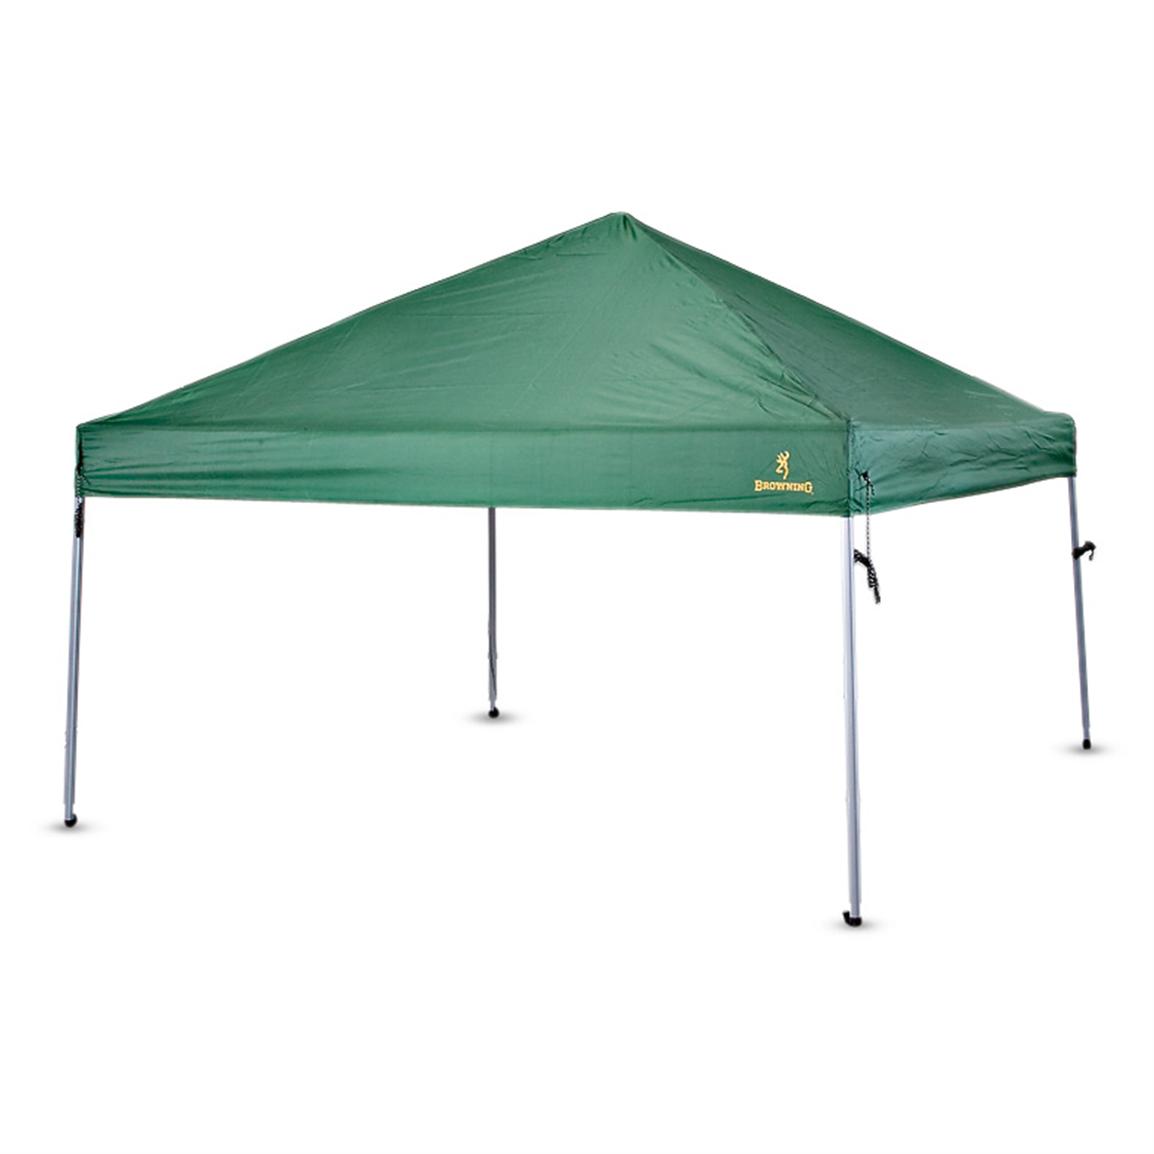 Browning  Equinox 8x8 Canopy  156440 Canopy  Screen 